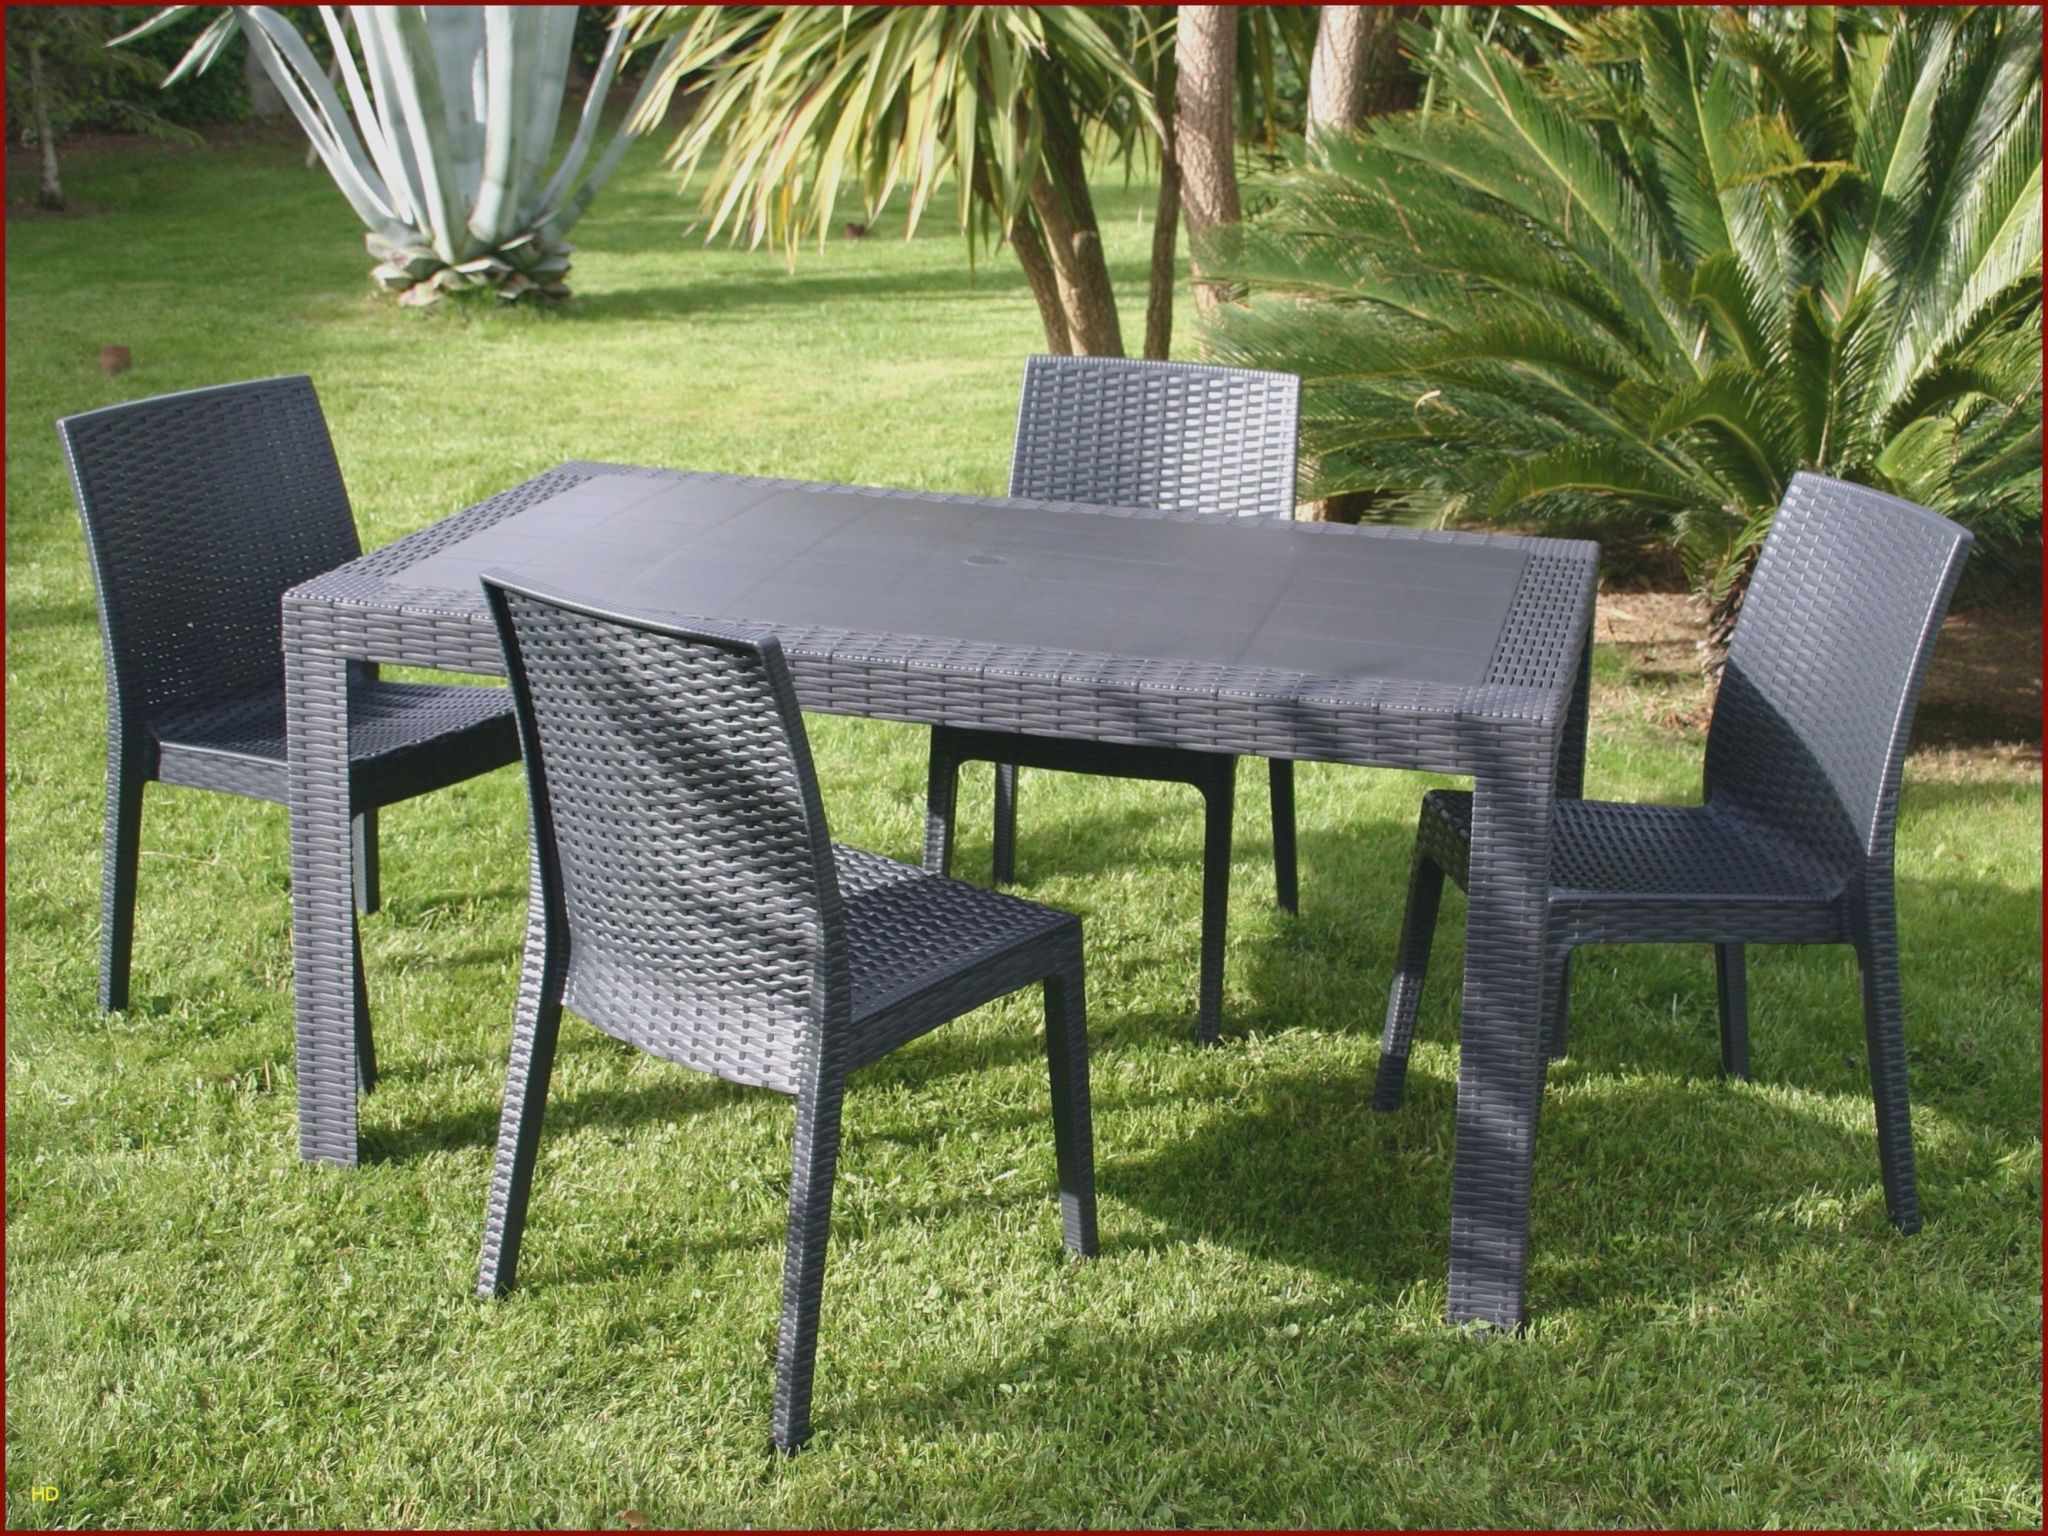 Leclerc Inspirant Chaises Luxe Chaise Ice 0d Table Jardin Resine Lovely